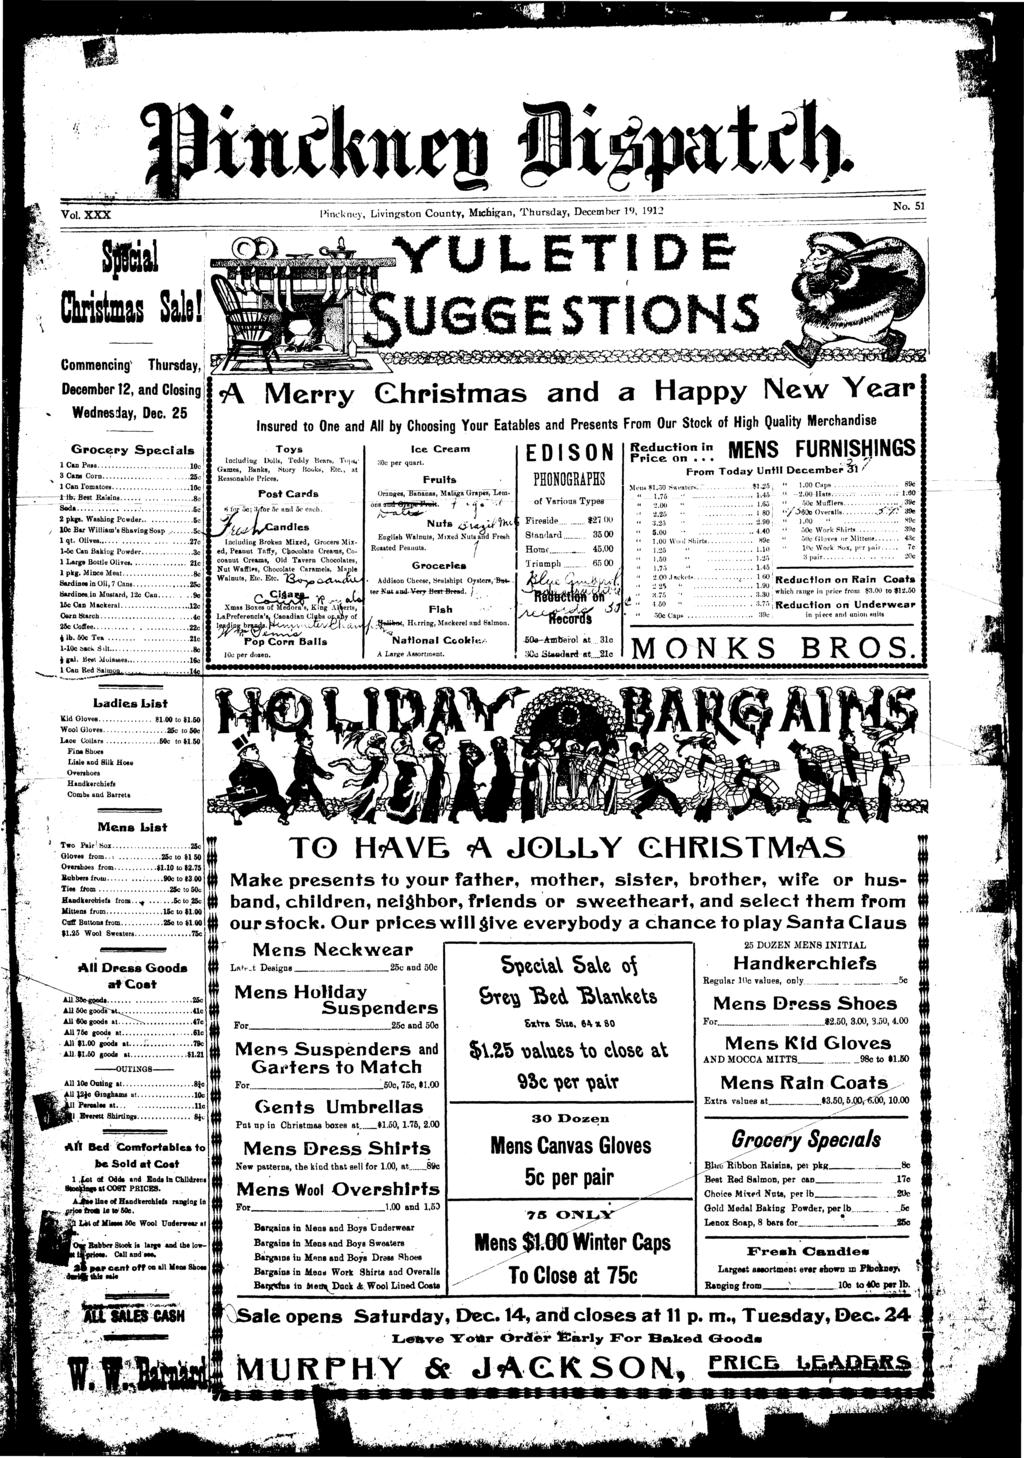 - Vol. XXX PncUney, Lvngston County, Mchgan, Thursday, December V), 1912 No. 51 t. - Commencng Thursday, December 12, and Closng A Merry Chrstmas and a Happy New Year n M Wednesday, Dec.